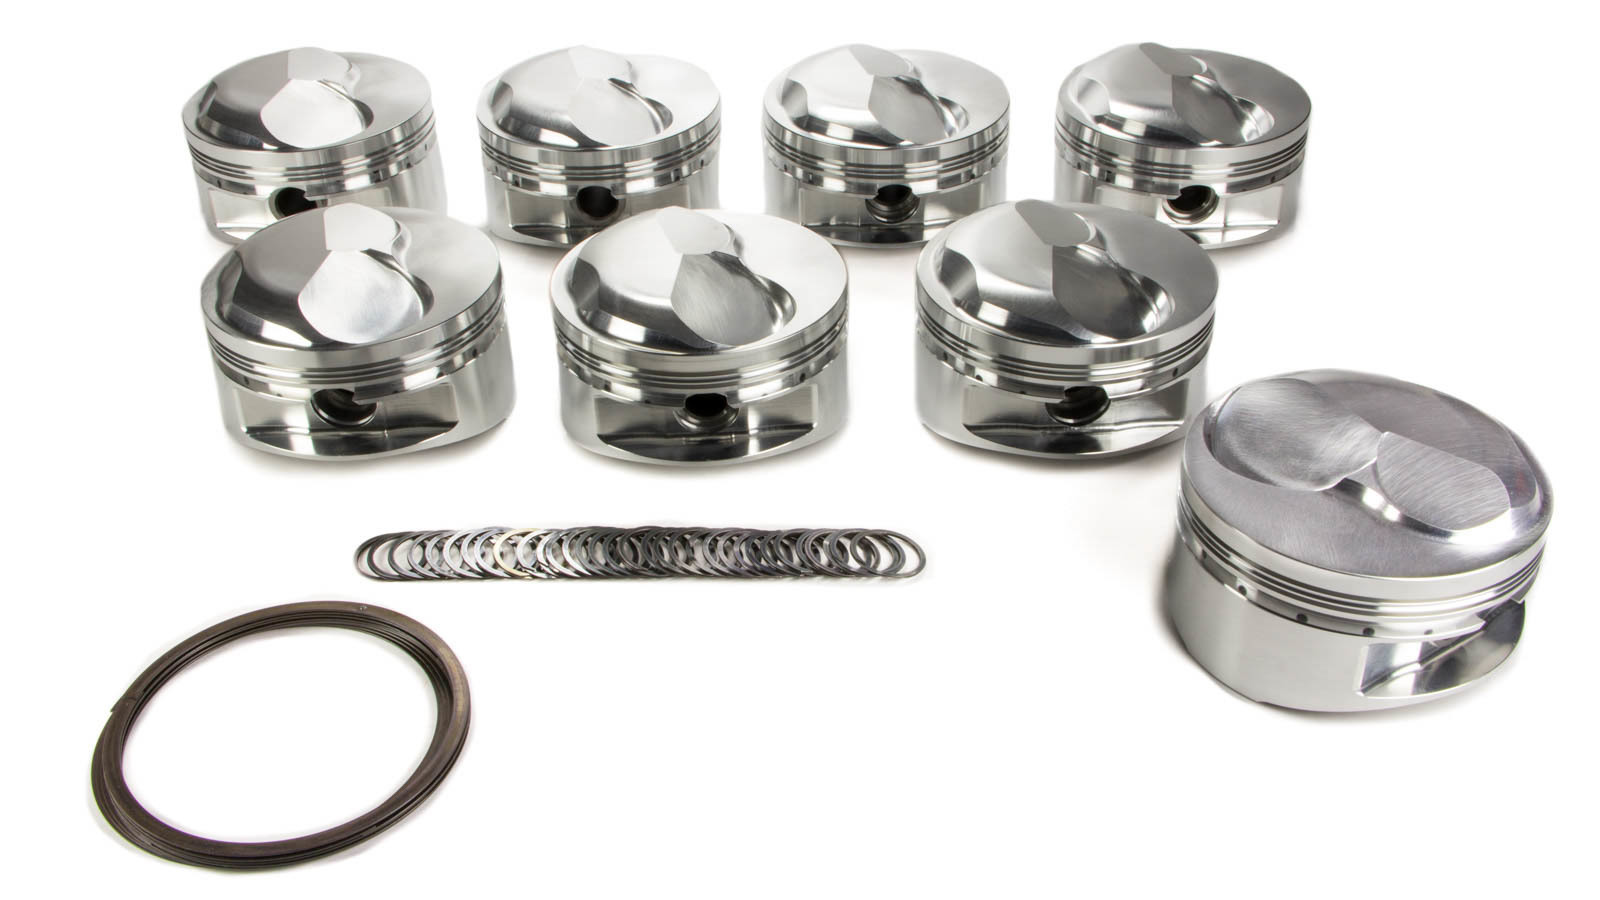 JE Pistons 258249 Piston, Big Block Open Chamber Dome, Forged, 4.560 in Bore, 1/16 x 1/16 x 3/16 in Ring Grooves, Plus 37.00 cc, Big Block Chevy, Set of 8